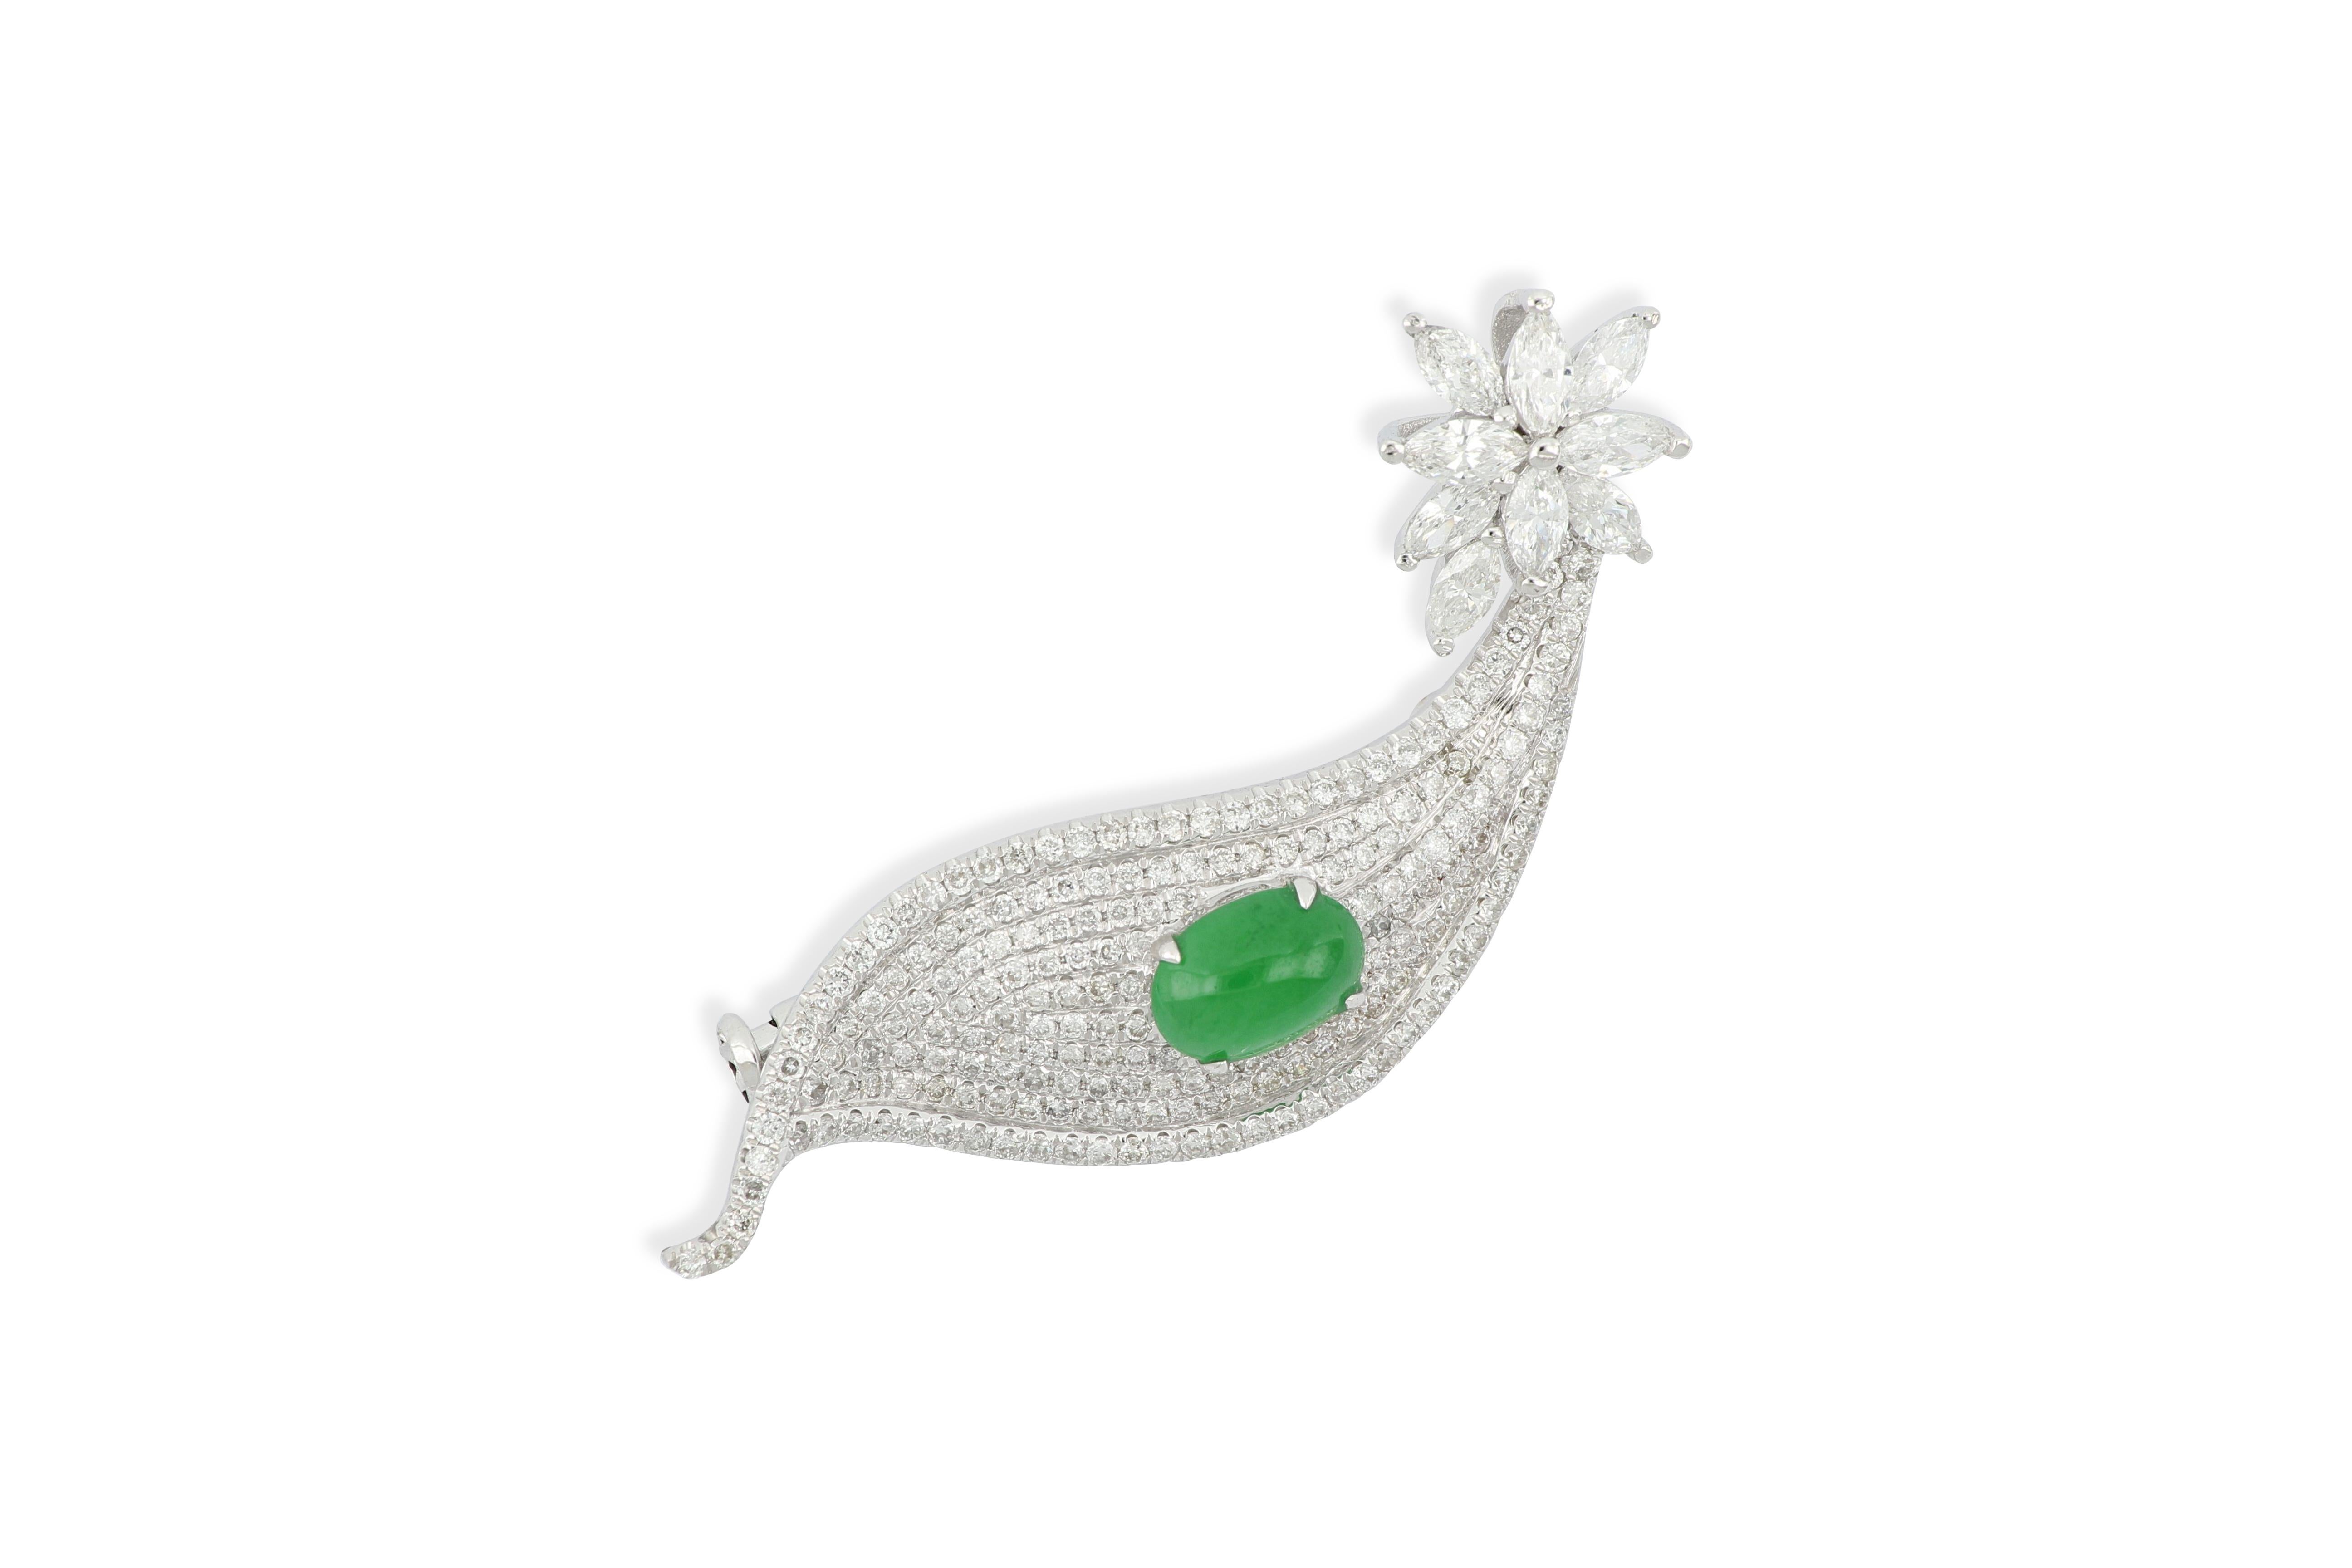 The magnificent brooch in a leaf shape featuring a translucent oval natural jadeite cabochon of bright emerald green colour, decorated with pear shape, marquise and brilliant-cut diamonds weighing 1.33 carats in total, mounted in 18K white gold.